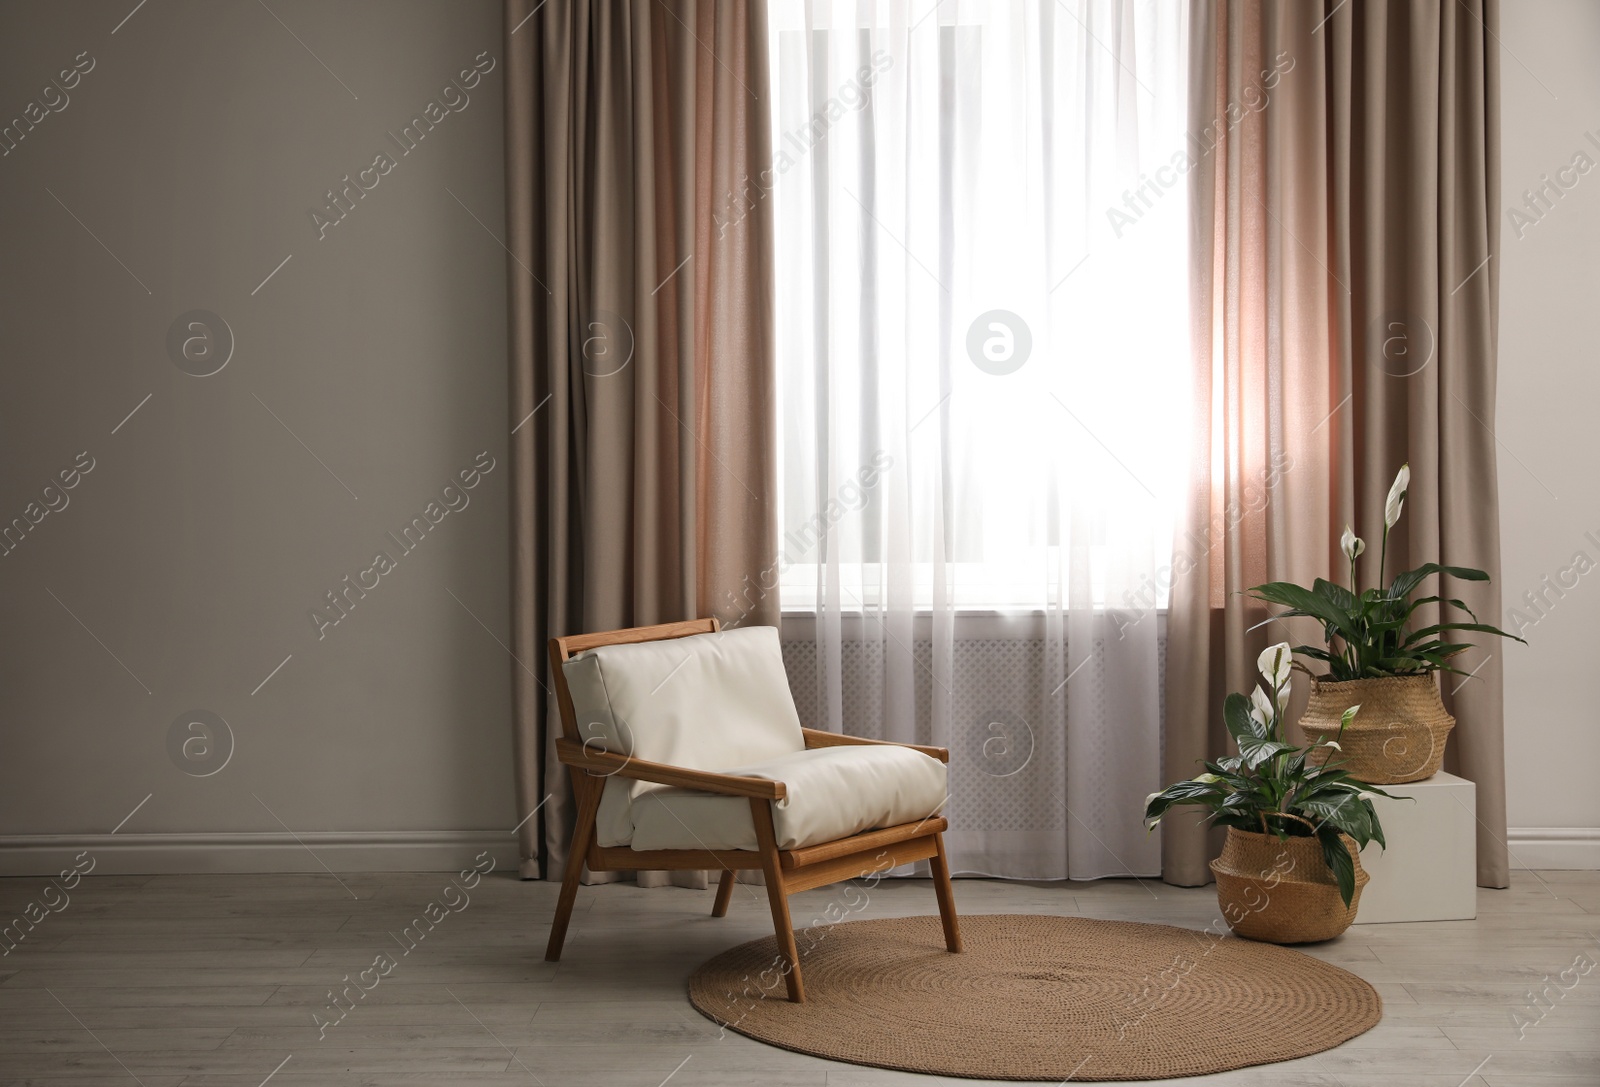 Photo of Comfortable armchair near window with elegant curtains in room